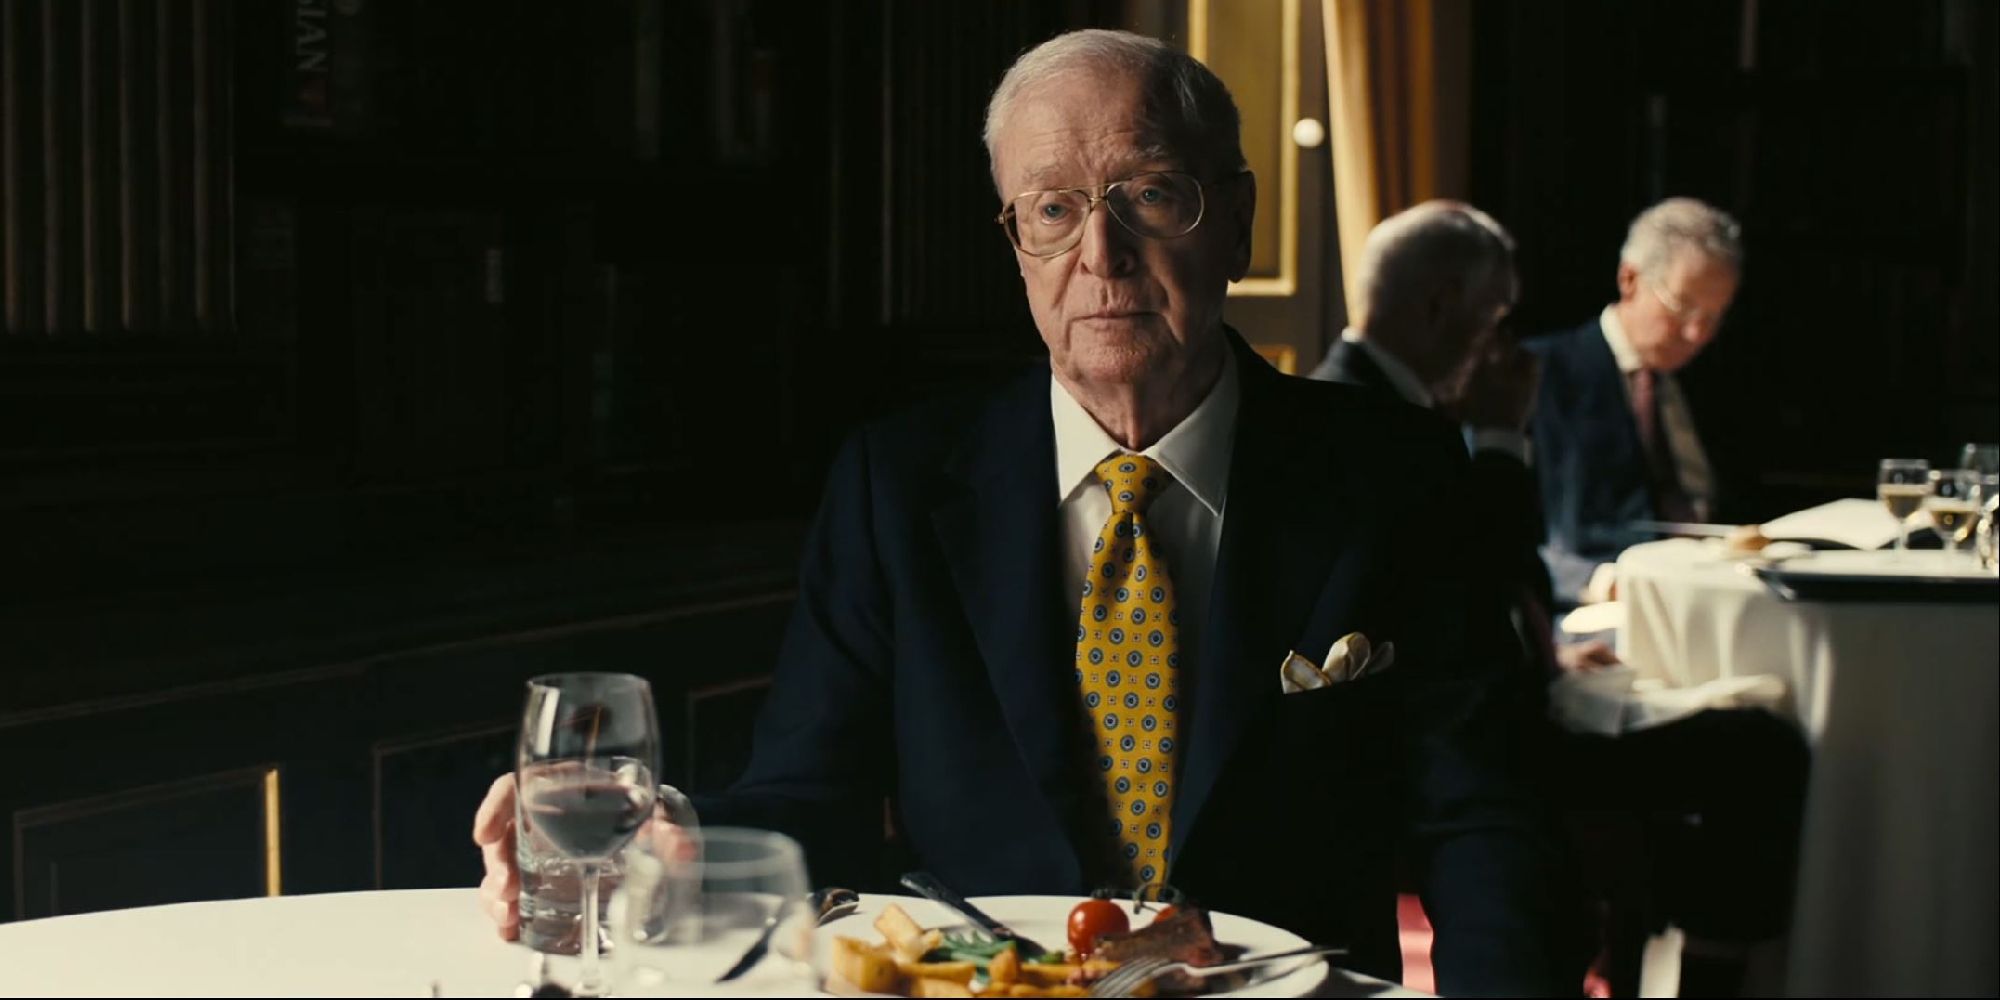 Michael Caine as Michael Crosby, sitting with a plate of food in front of him and looking solemn in Tenet